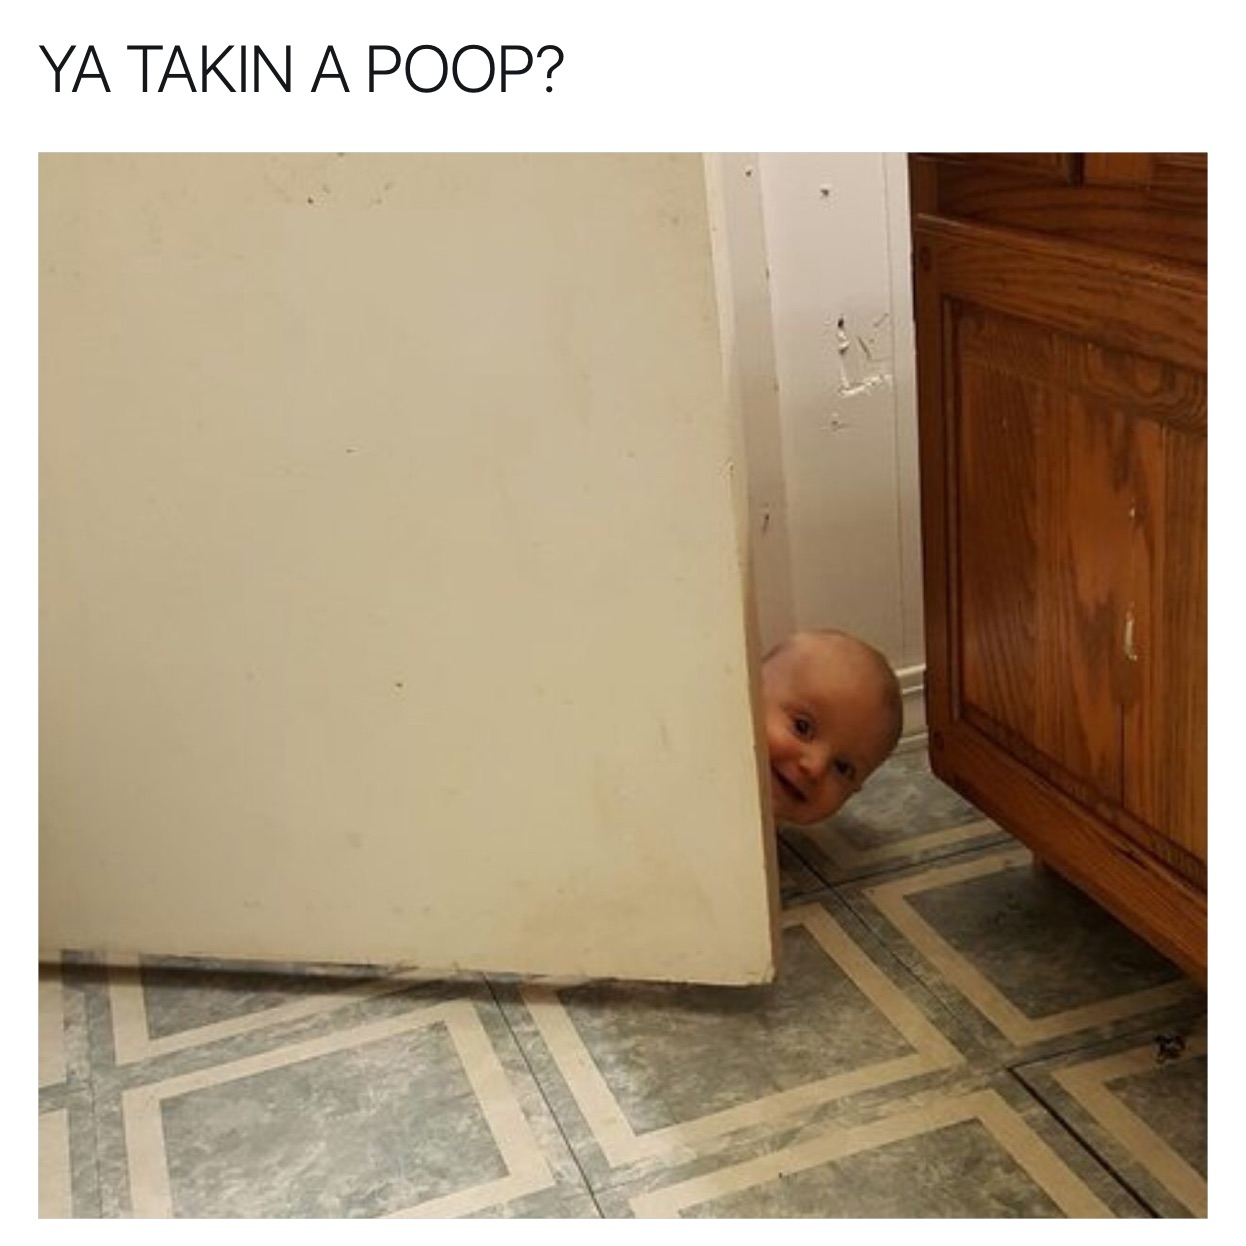 went to the bathroom and forgot - Ya Takin A Poop?